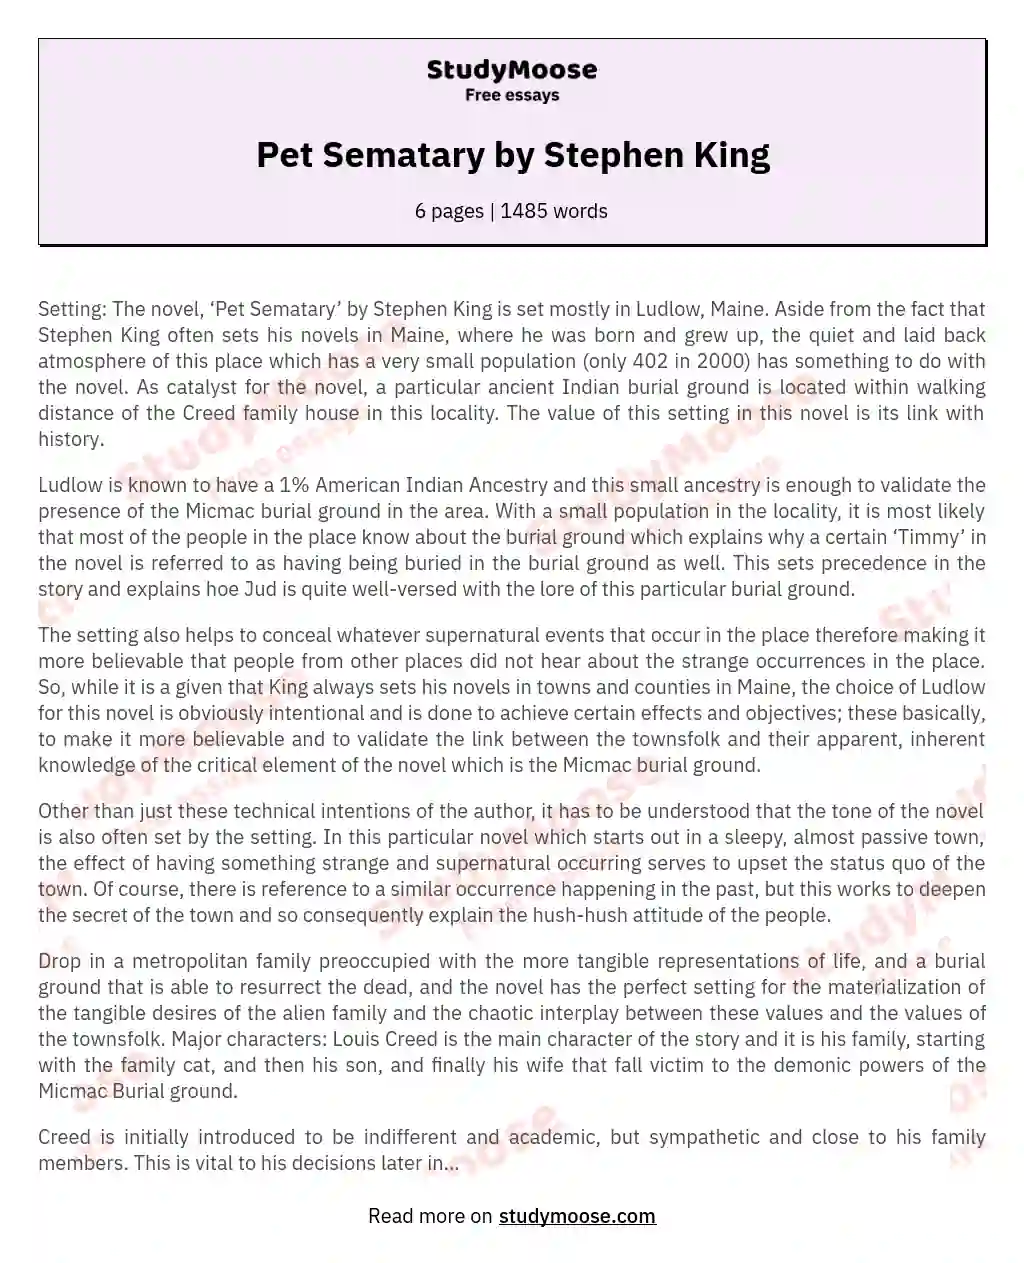 Pet Sematary by Stephen King essay